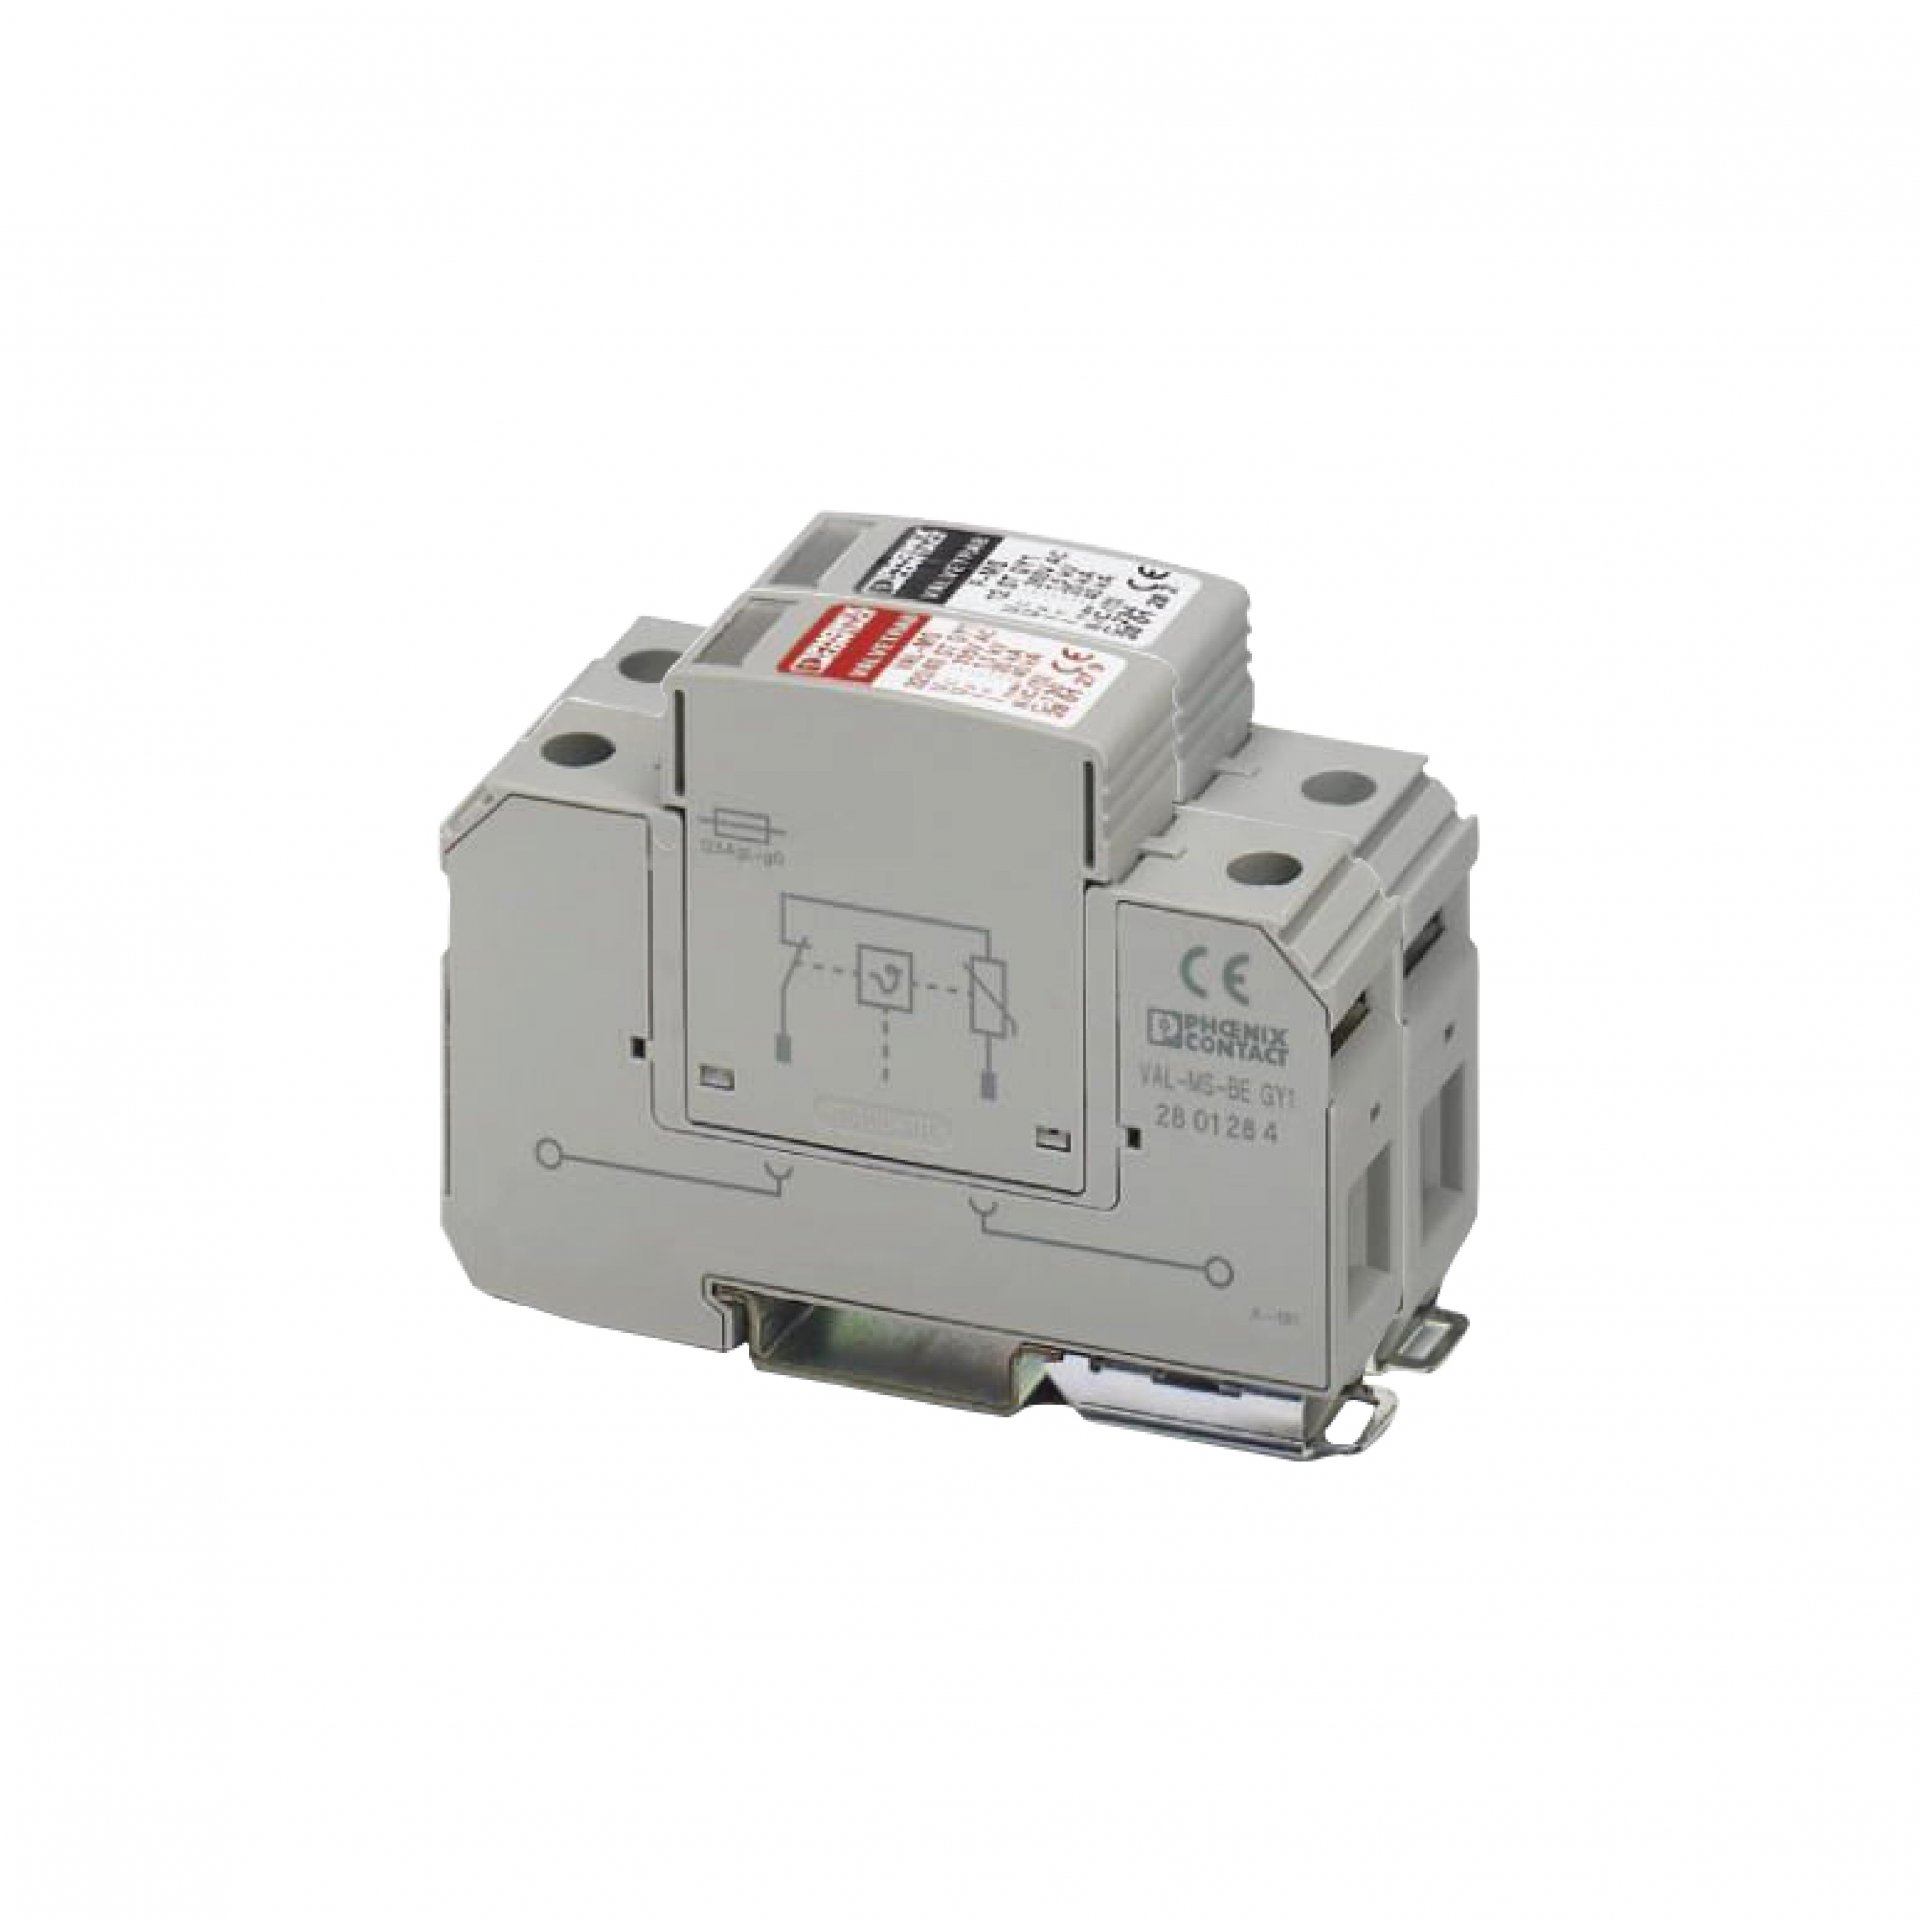 Surge protection VAL-MS 320/40/1+0 GY 1 + F-MS 12 GY 1